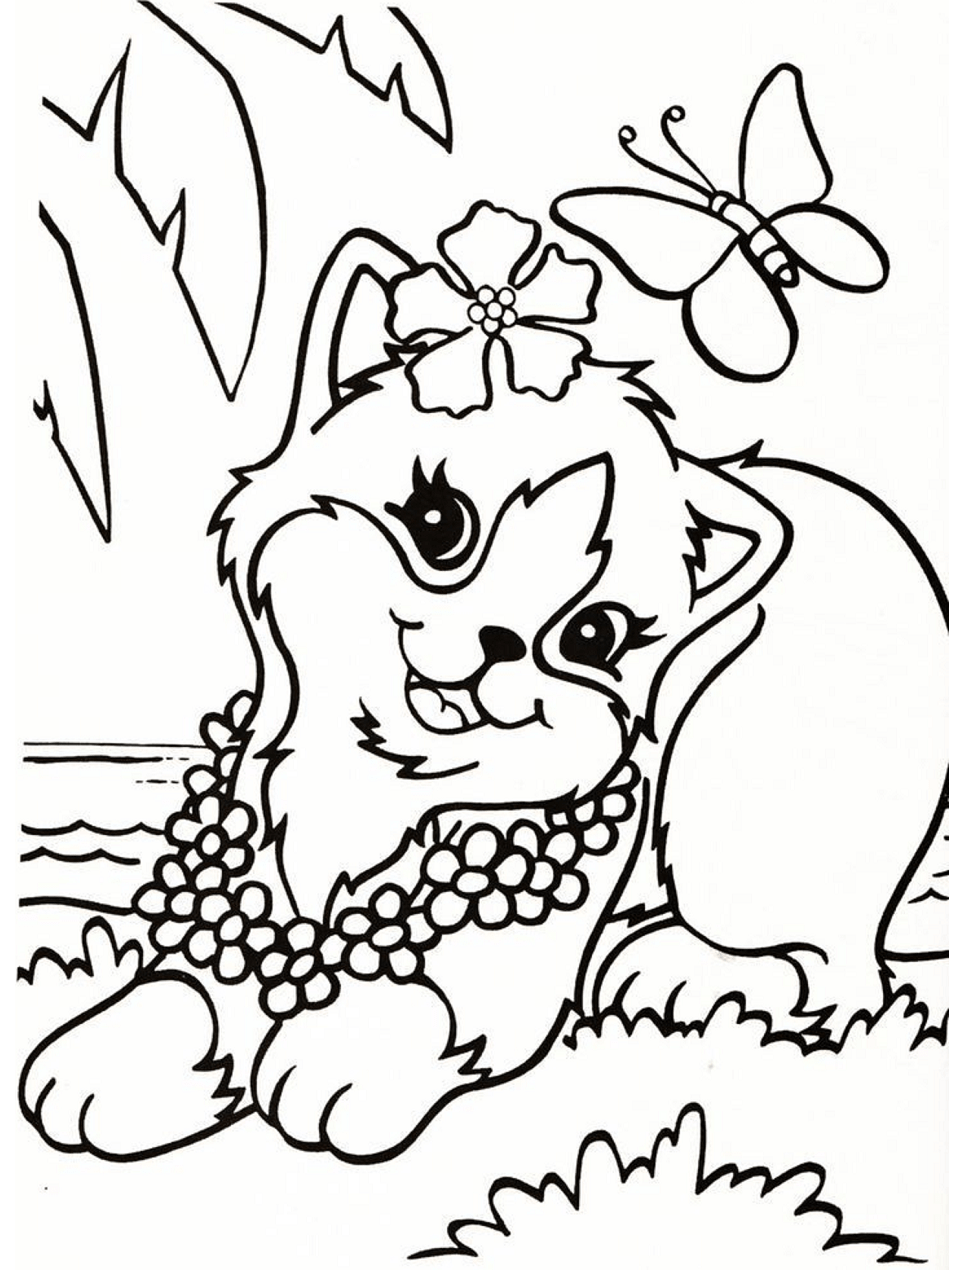 Pretty Cat Lisa Frank Coloring Page   Free Printable Coloring ...